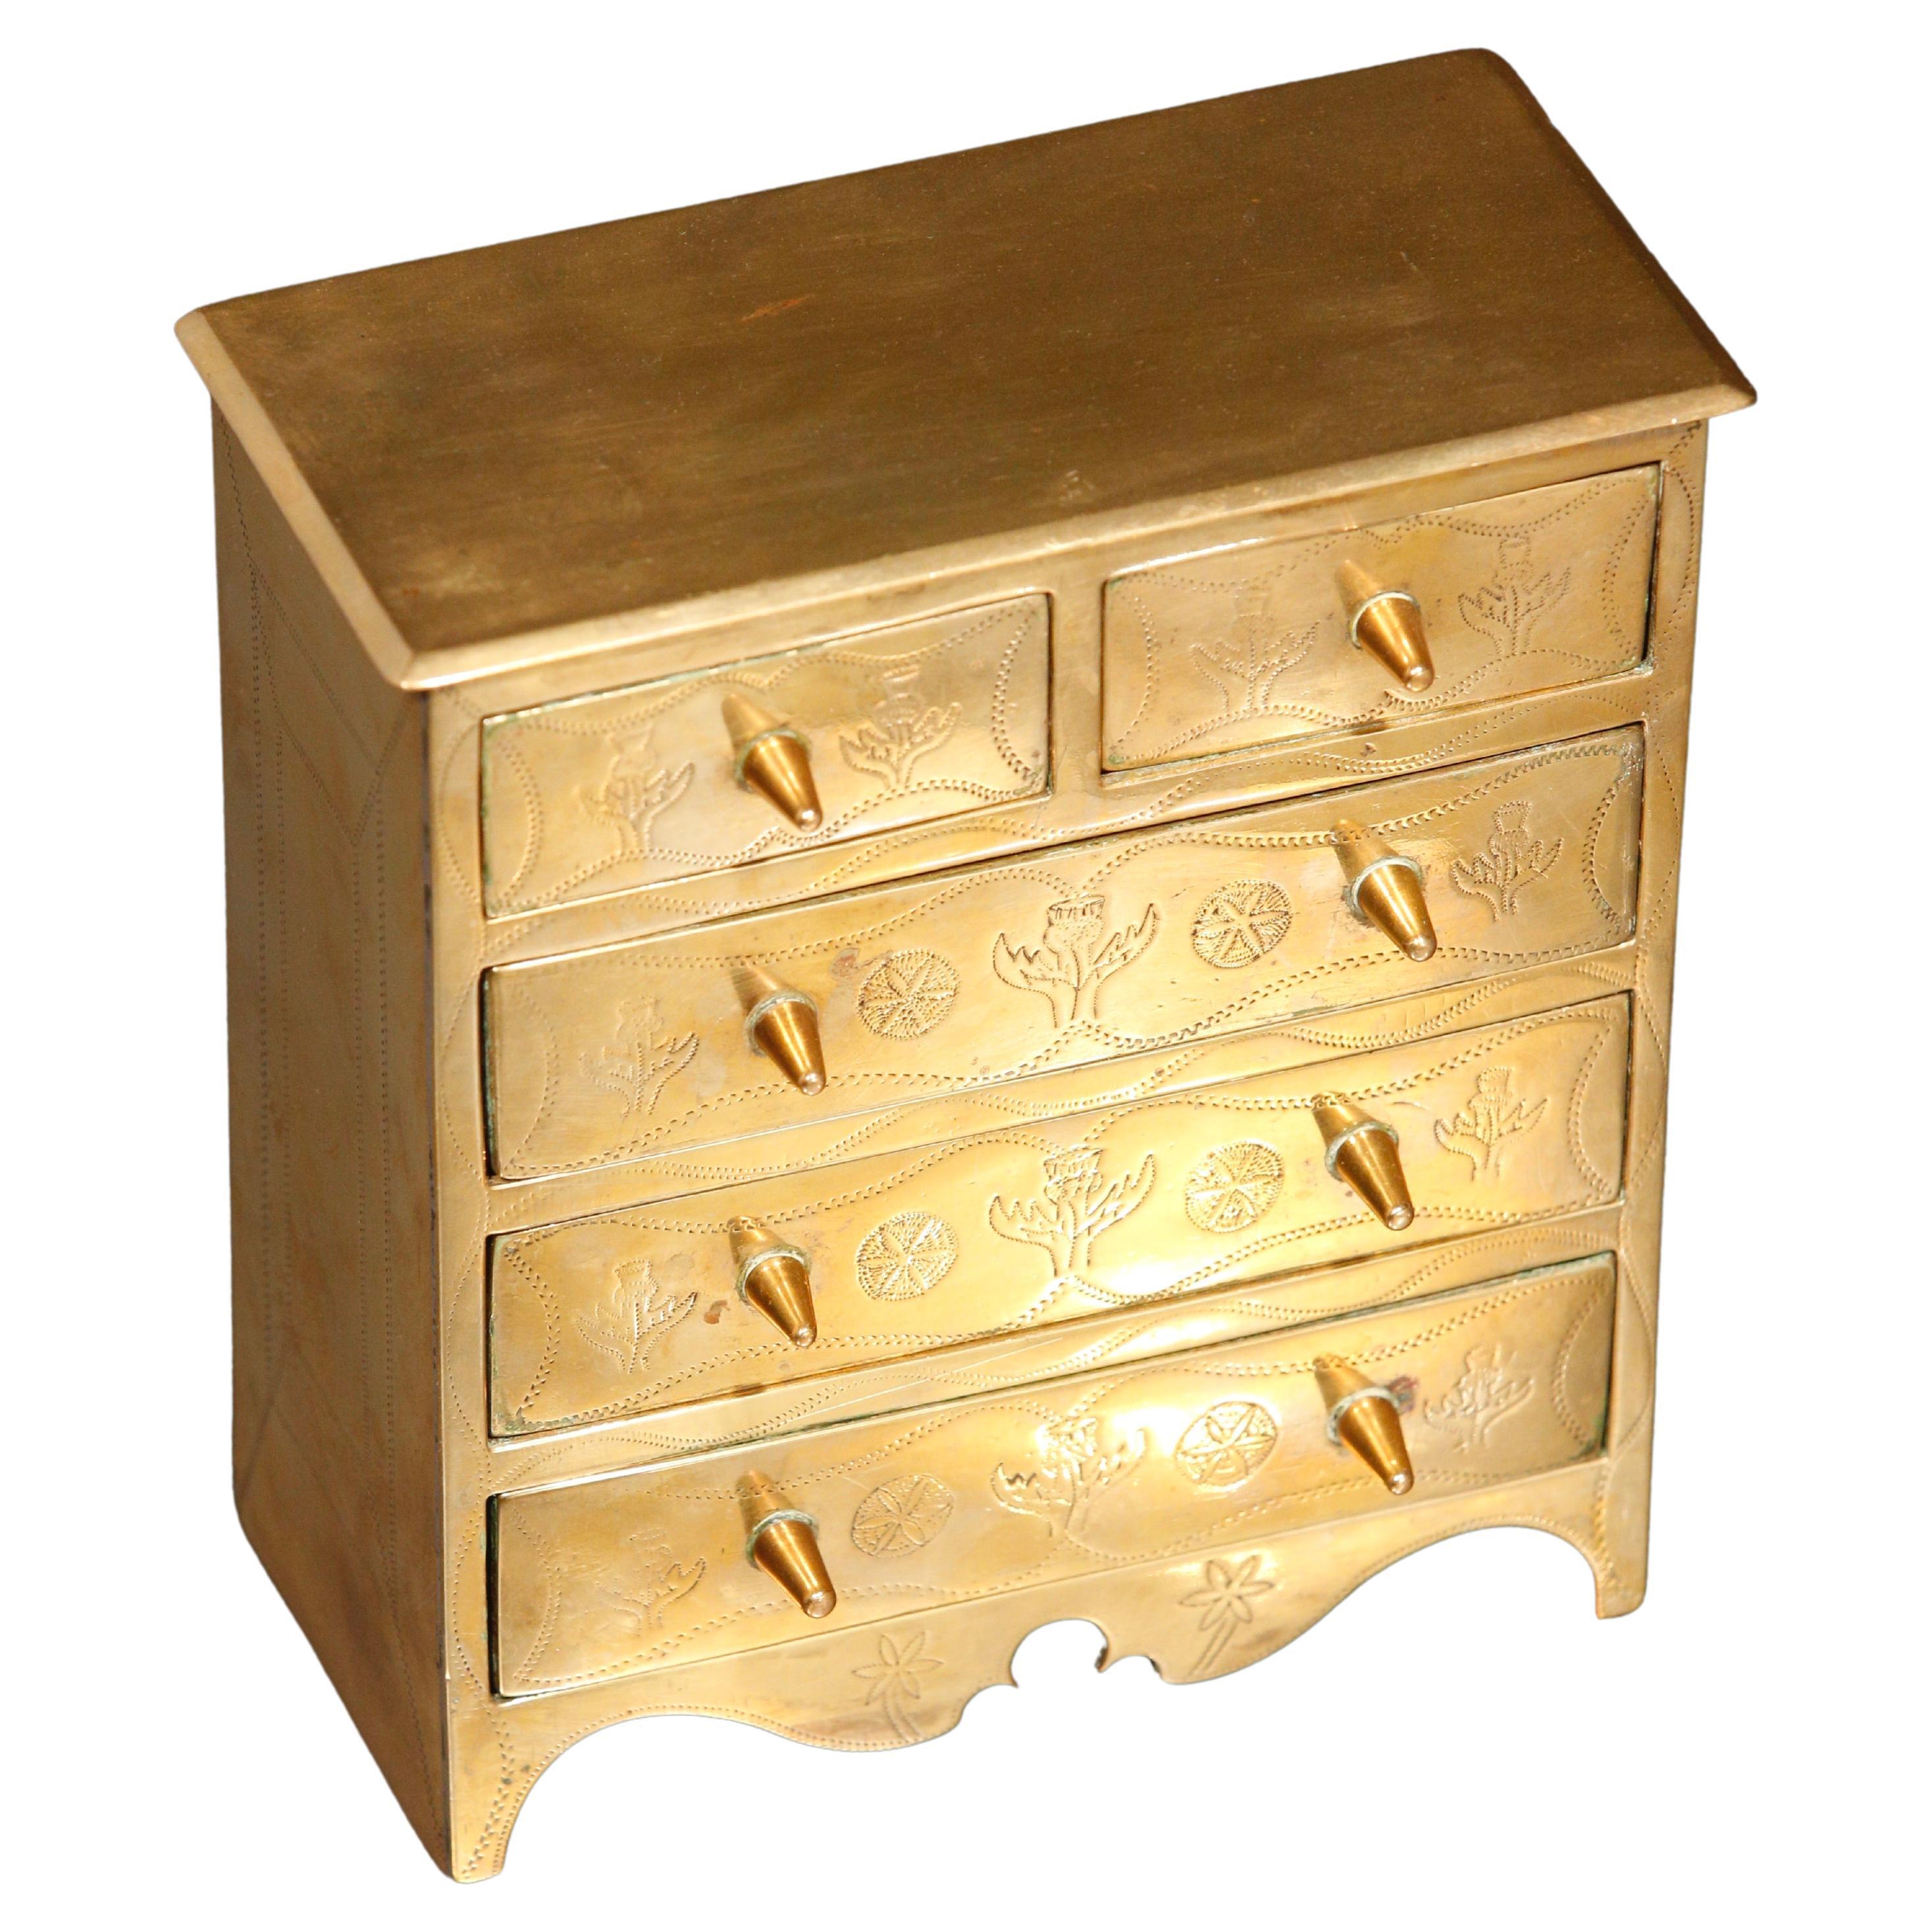 Chest of Drawers Jewelry Box Apprentice Chest Brass Engraved 

Solid brass apprentice chest of drawers, chest with 5 working drawers all with stylized thistle engraved decorations

Slight tarnishing in areas.  
